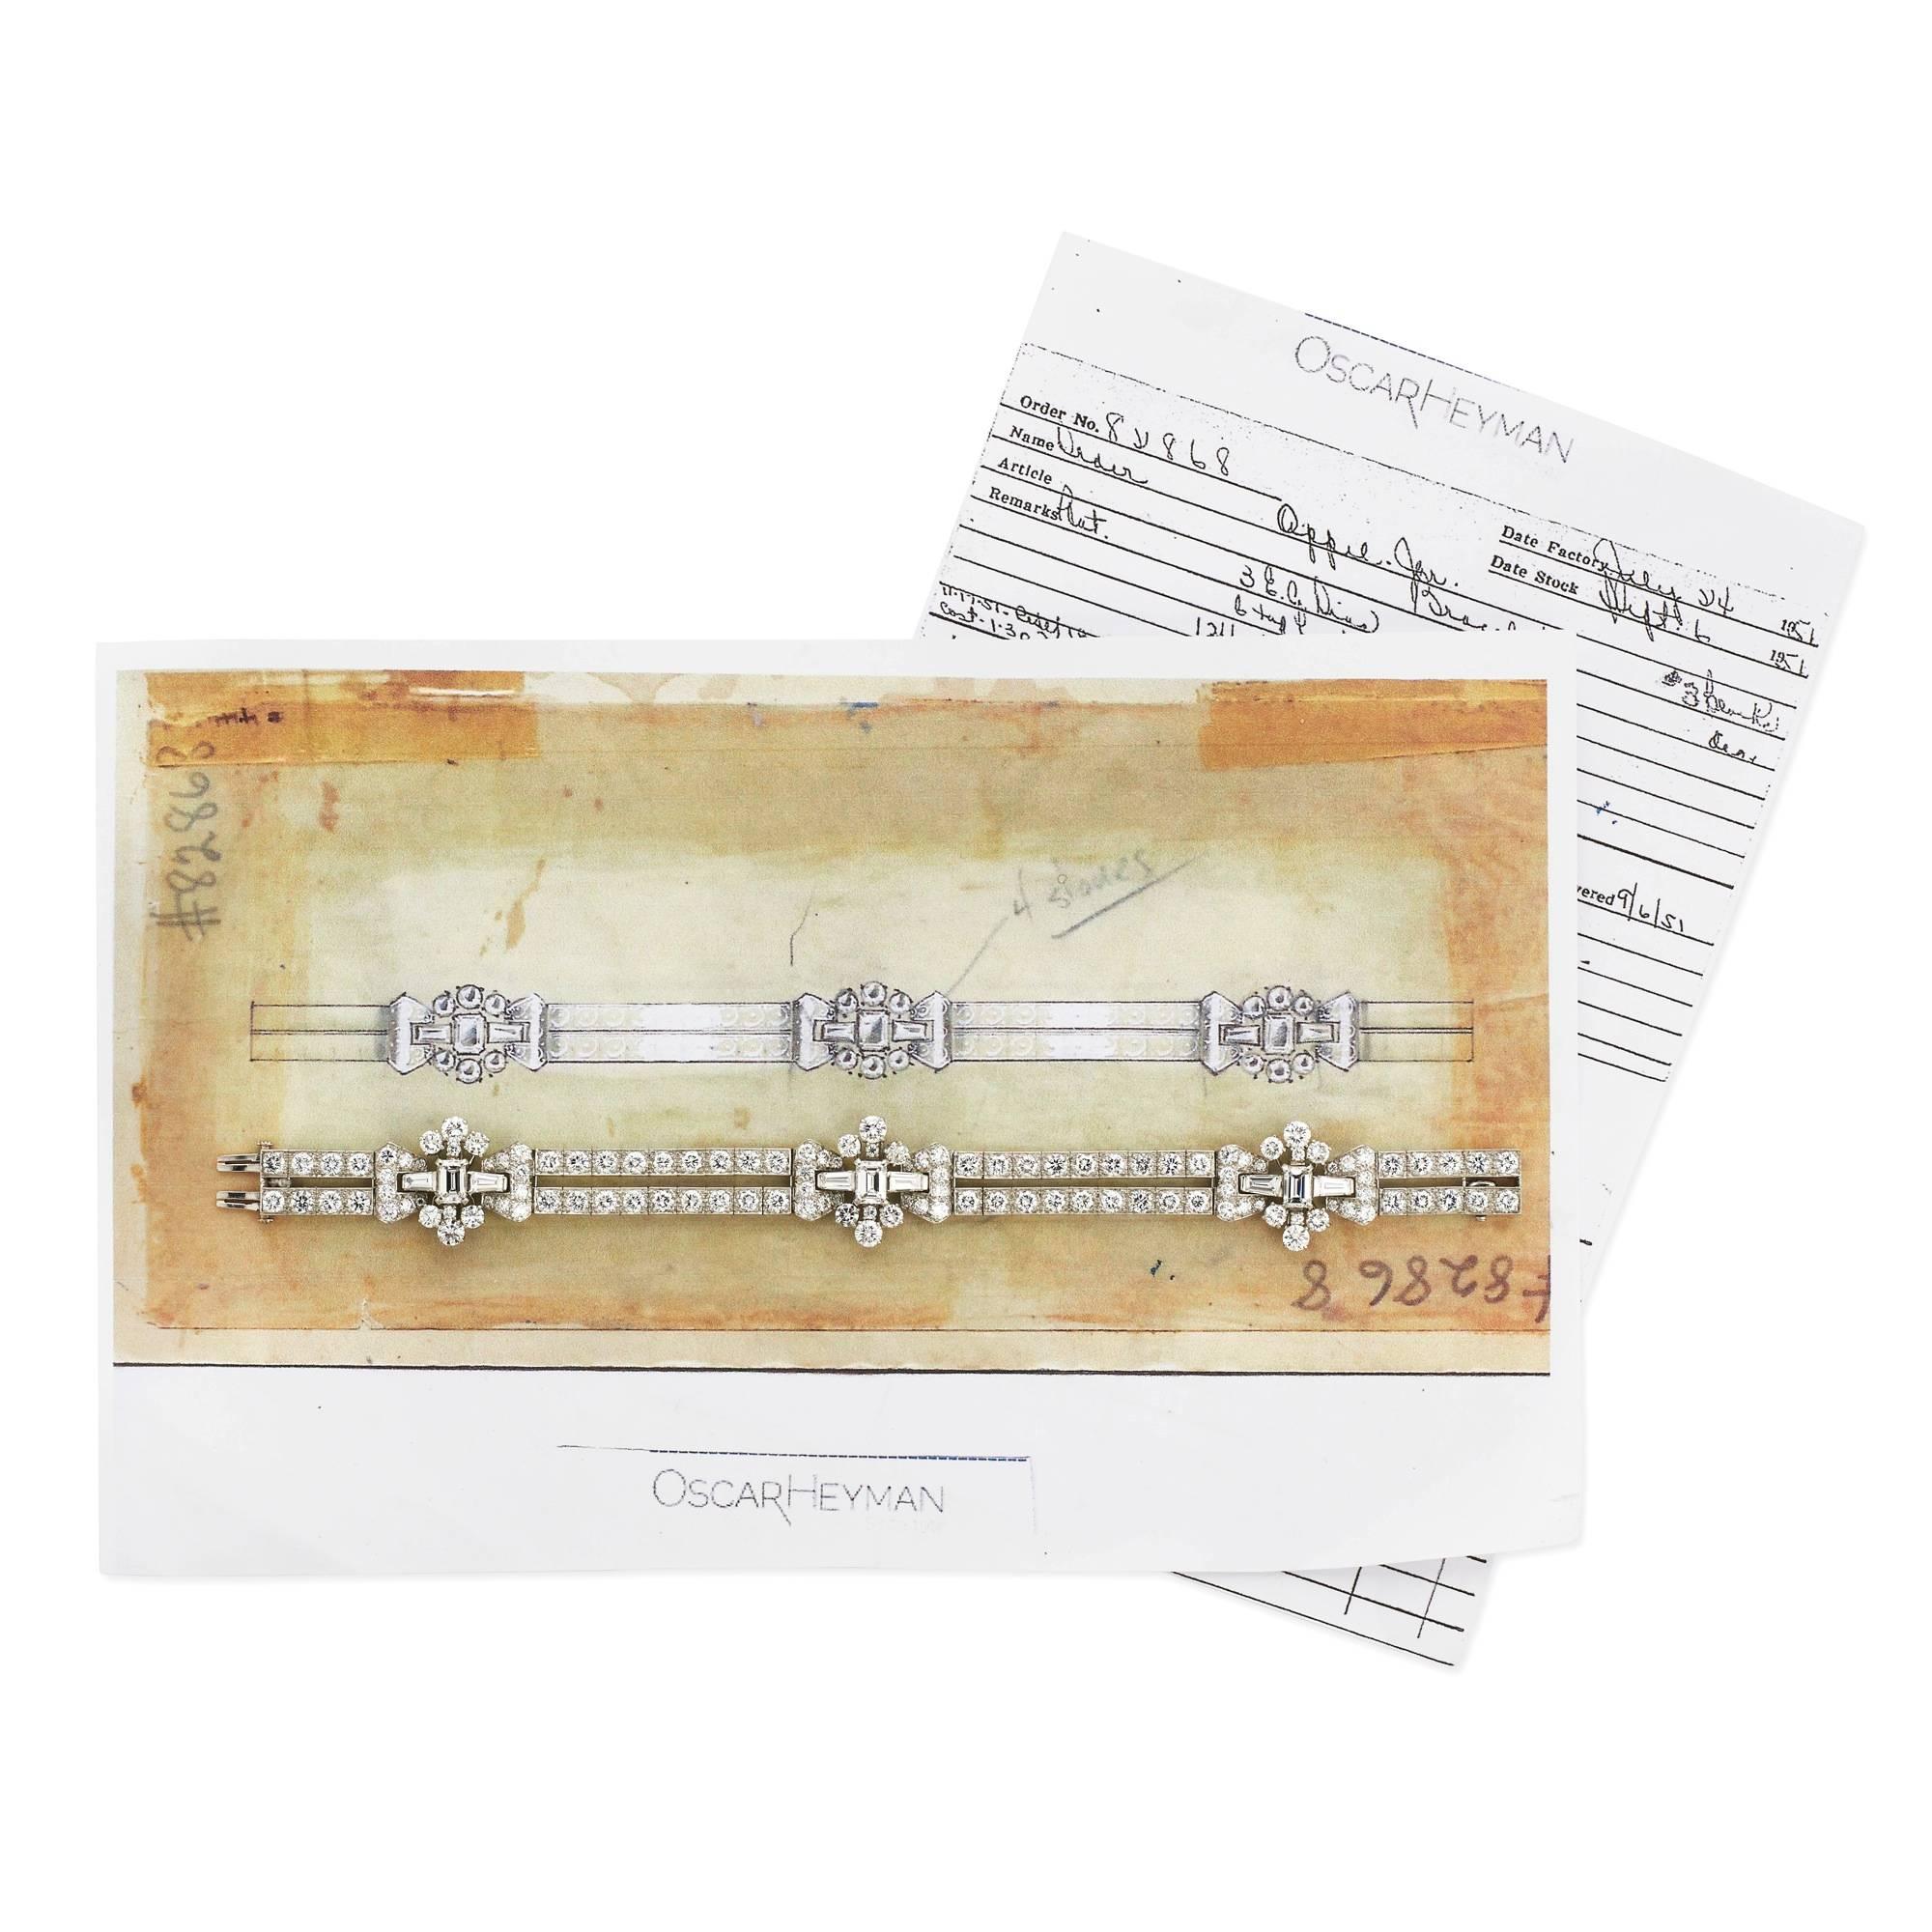 A highly desirable and rare brilliant cut, emerald cut and tapered baguette cut diamond bracelet set in platinum signed by Oscar Heyman in 1951 and numbered 82860

Highly unusually, we have copies of the original Oscar Heyman drawings and workshop